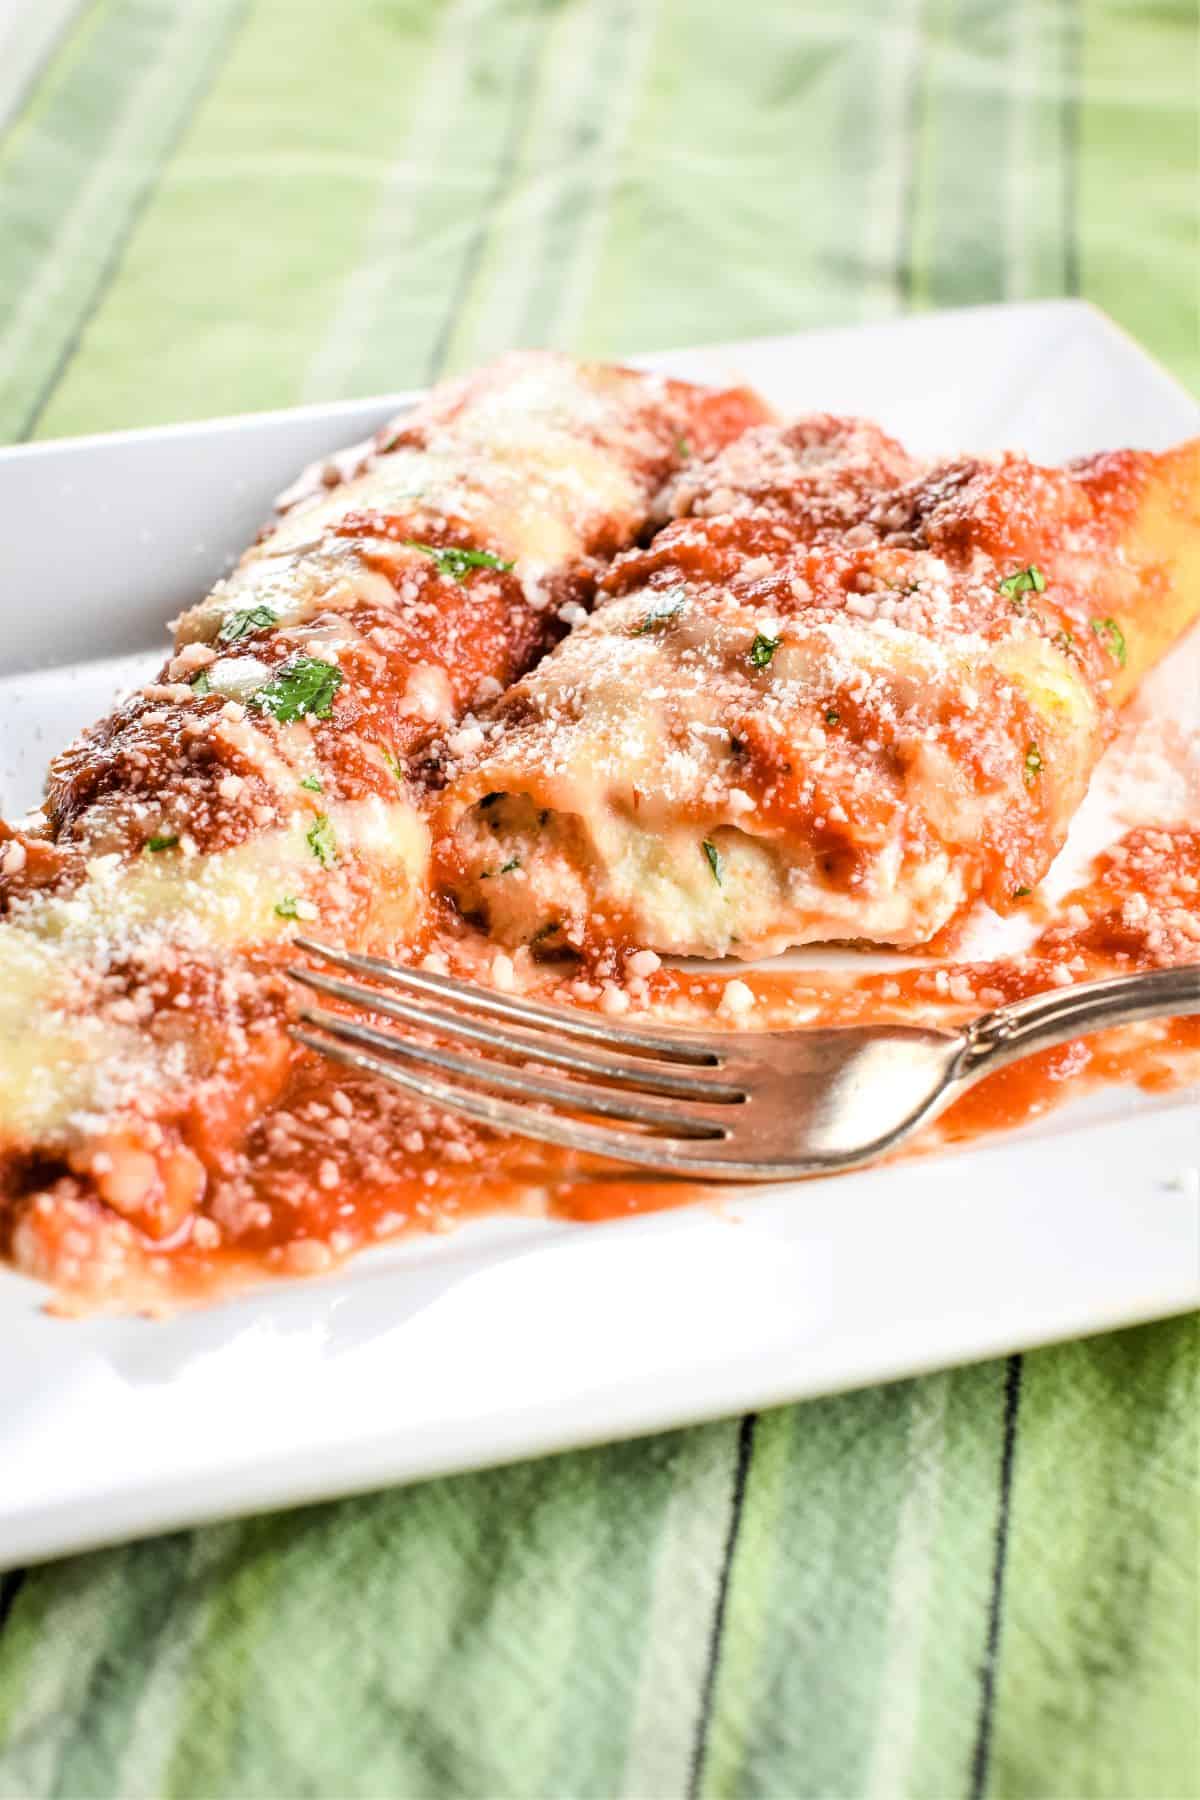 close-up of open manicotti on a white plate to expose the inside with a fork on the plate.